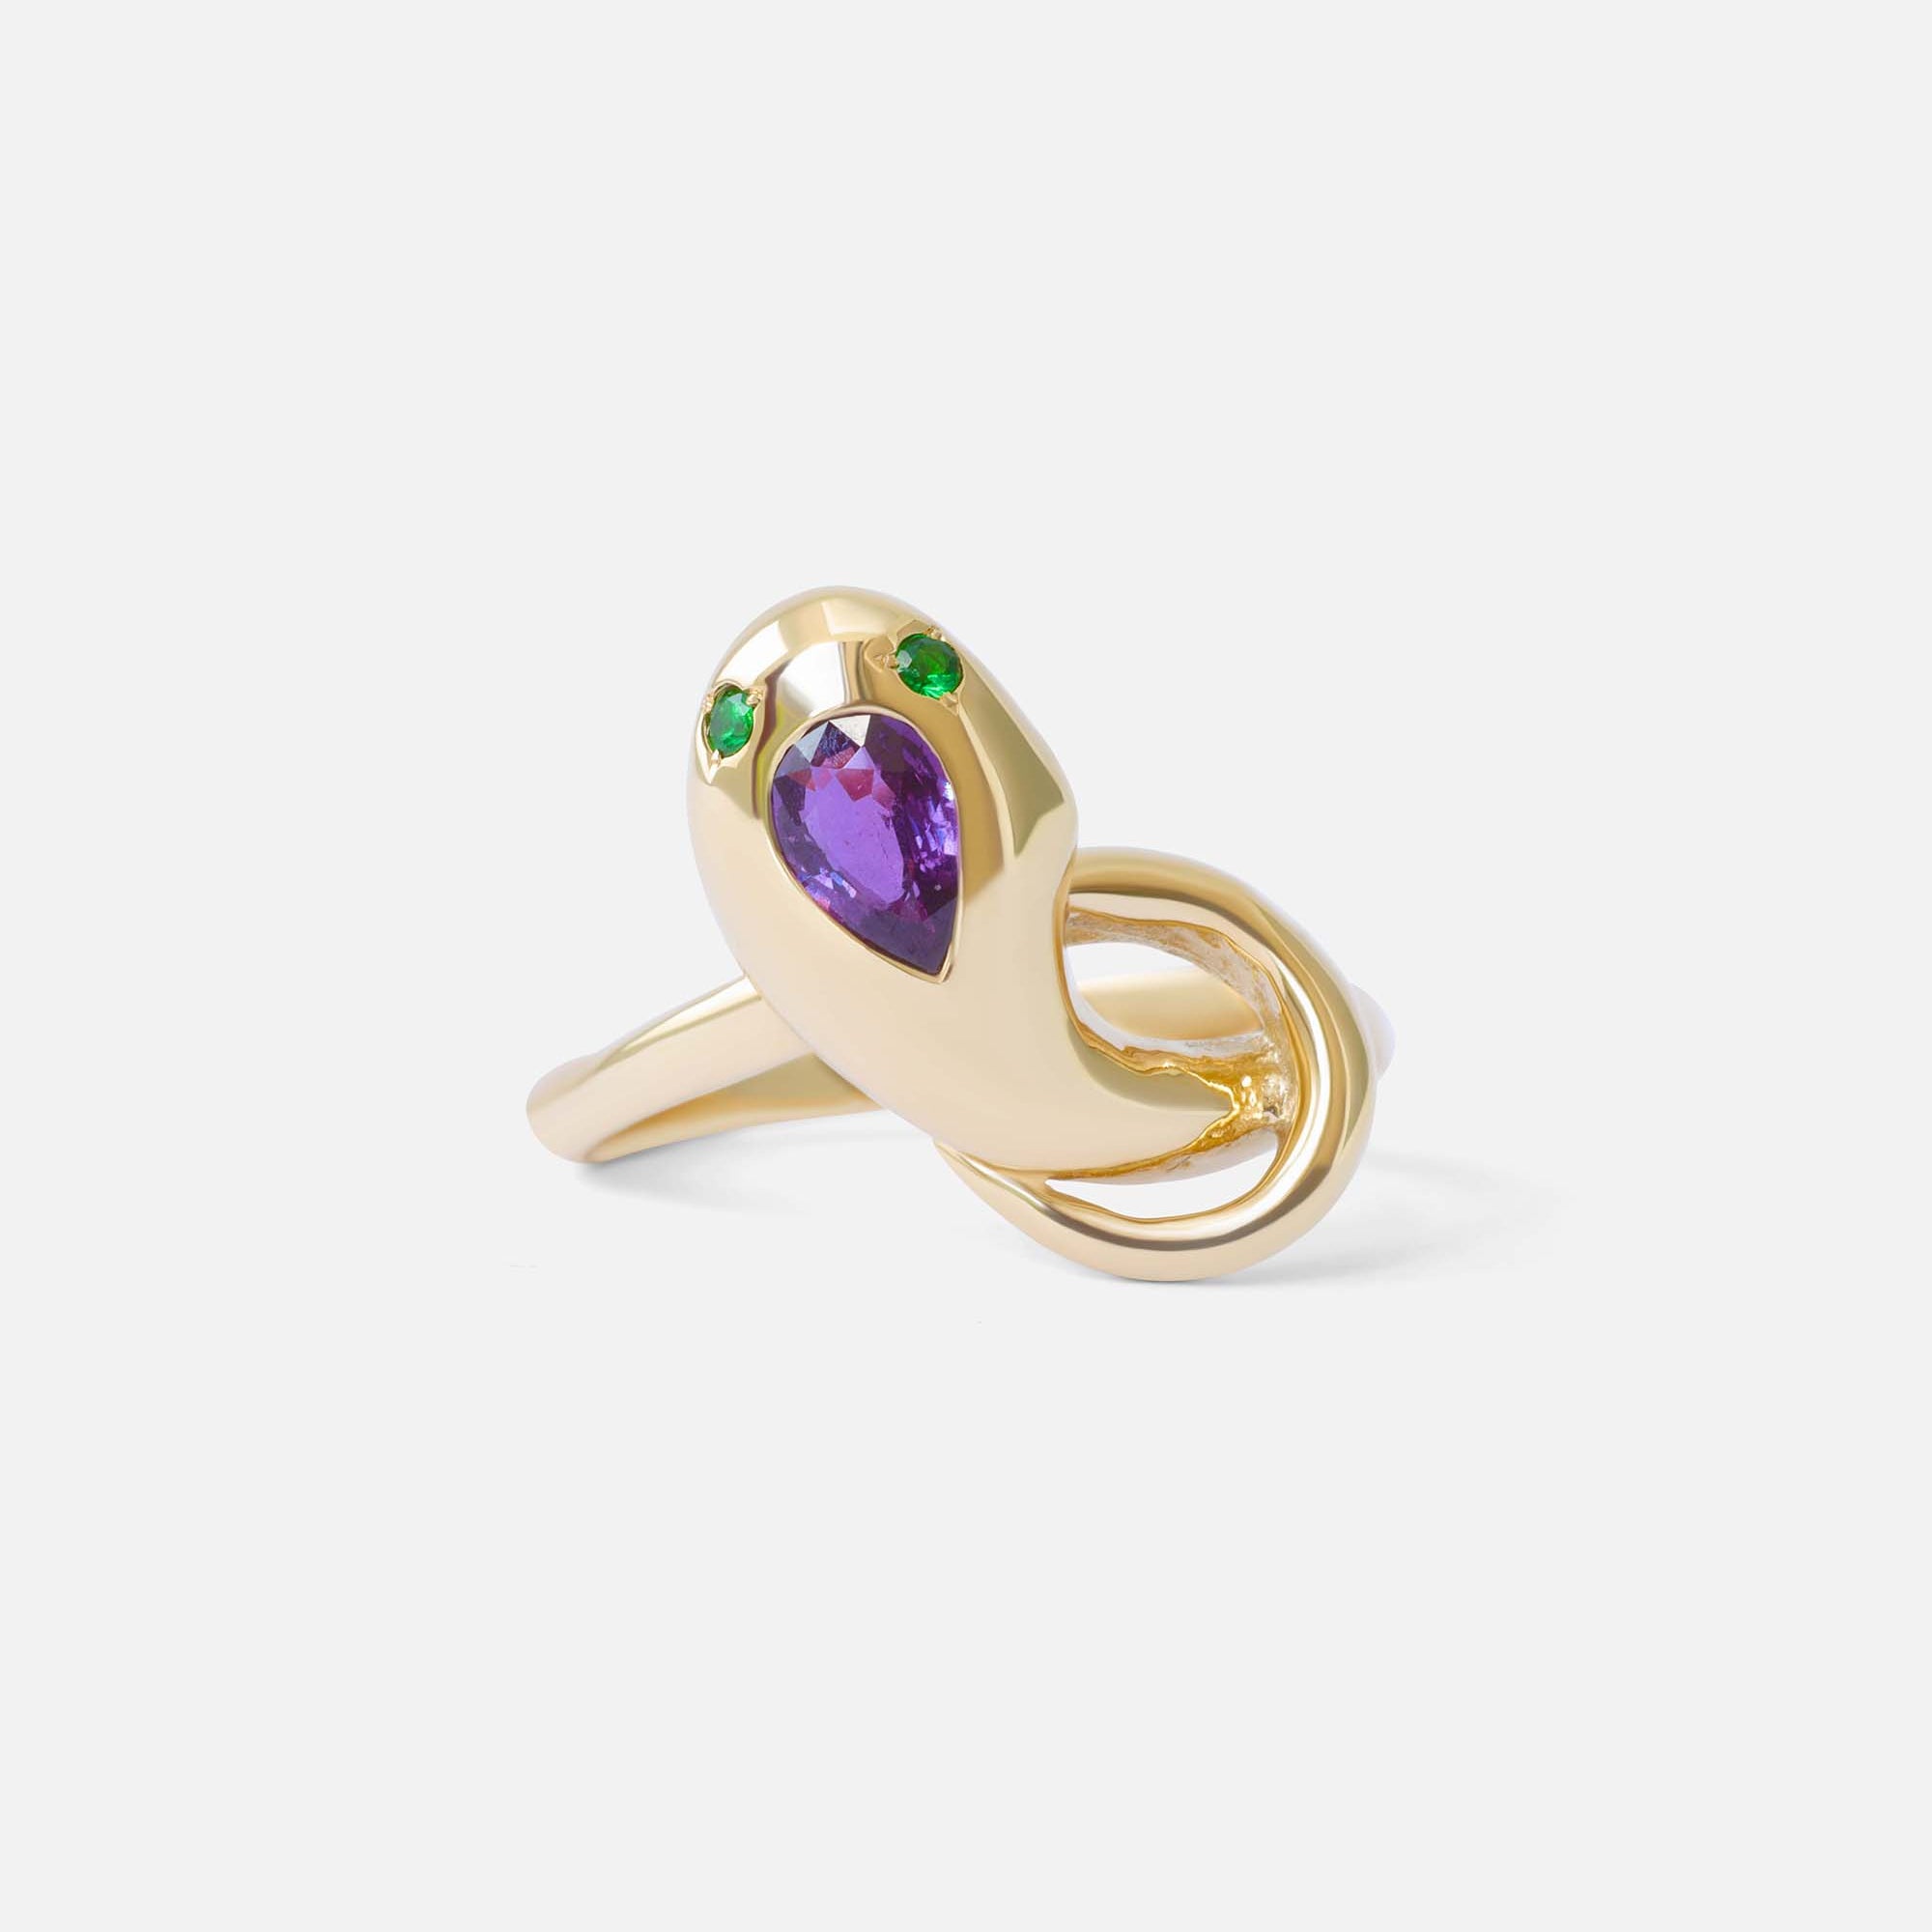 Nudum Serpentes Ring / Dark Purple Sapphire By Ides in ENGAGEMENT Category